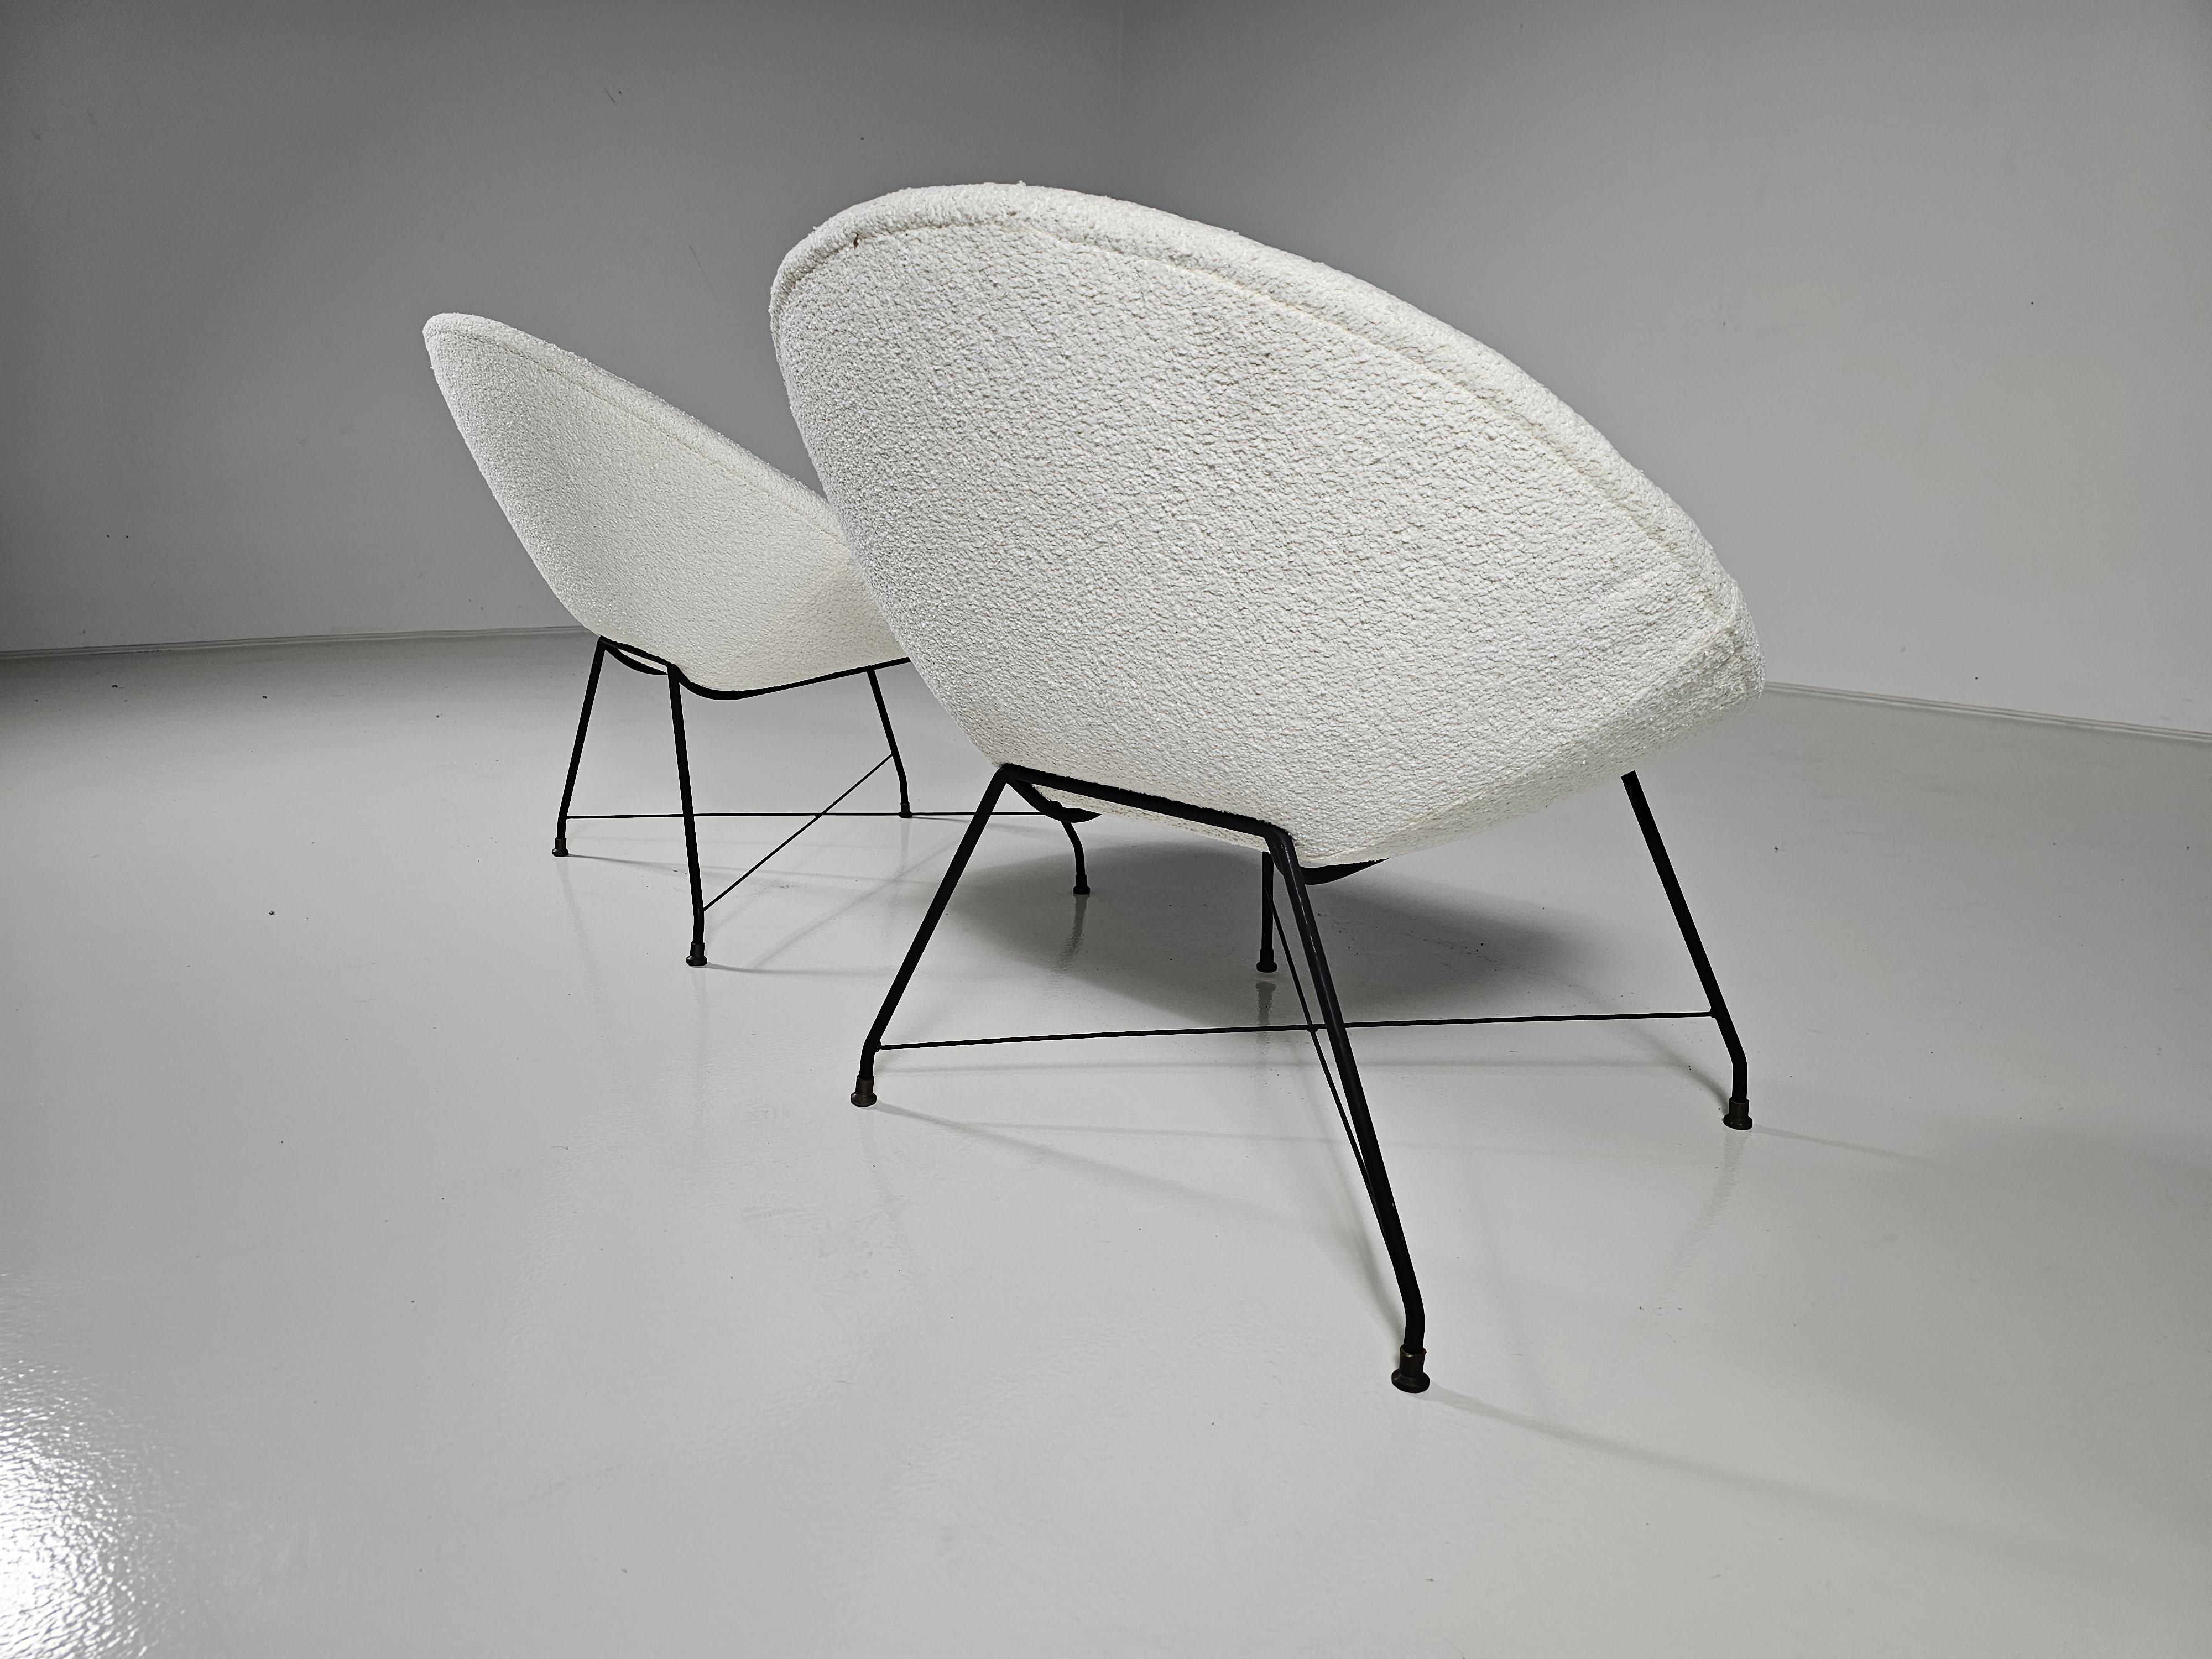 ‘Minoletta’ Lounge Chairs by Augusto Bozzi for Saporiti, 1950s In Good Condition For Sale In amstelveen, NL